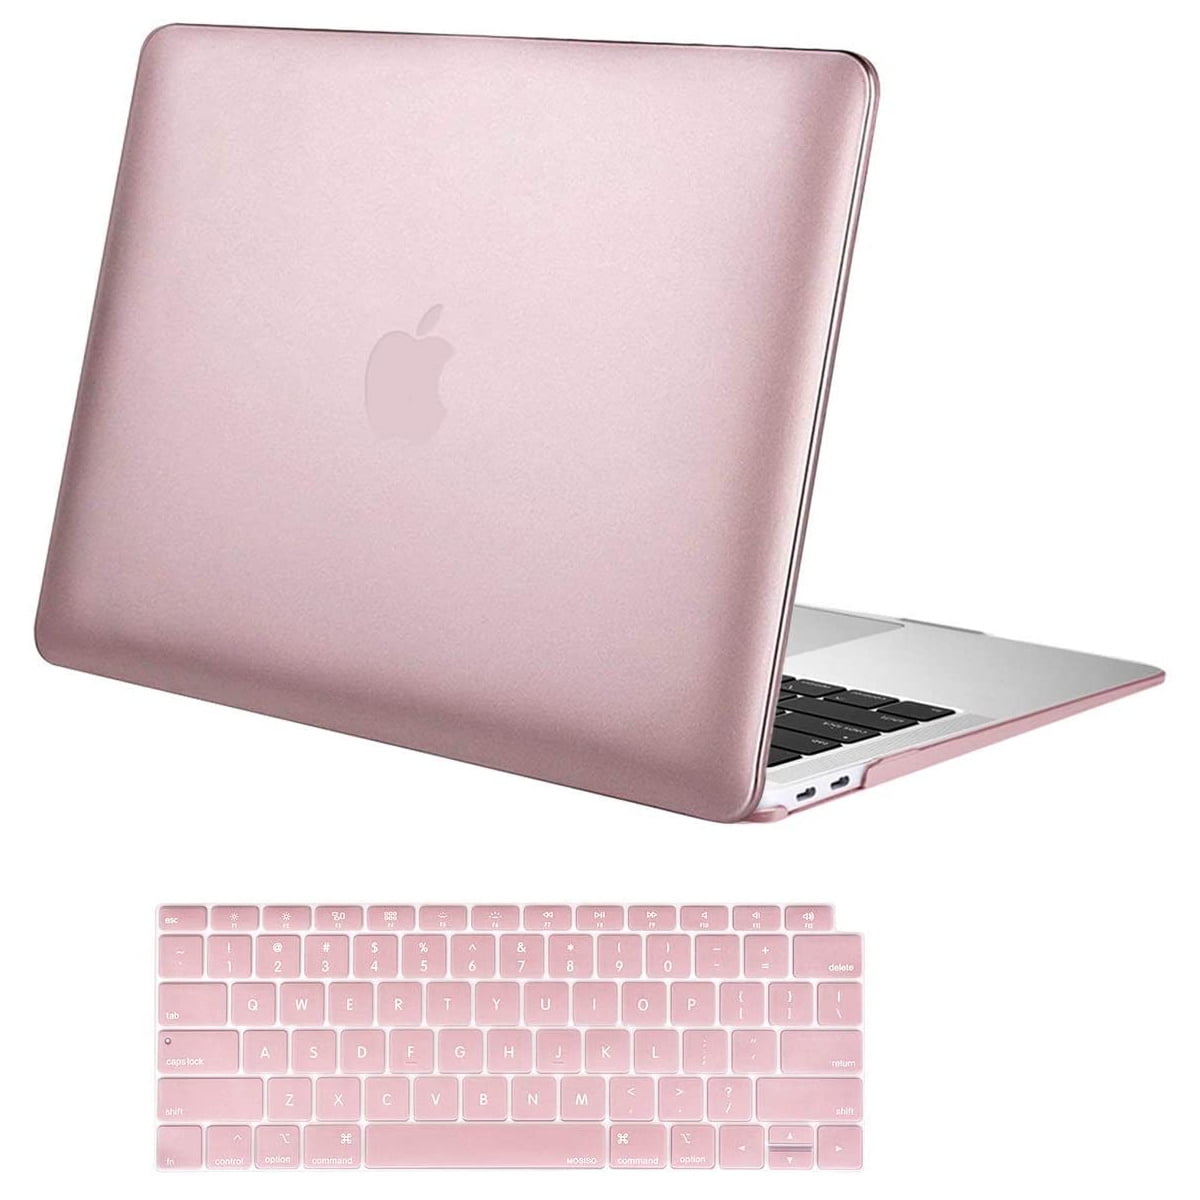 Plastic Peony Hard Shell & Keyboard Cover & Screen Protector & Storage Bag Green MOSISO Compatible with MacBook Air 13 inch Case 2020 2019 2018 Release A2337 M1 A2179 A1932 Retina Display Touch ID